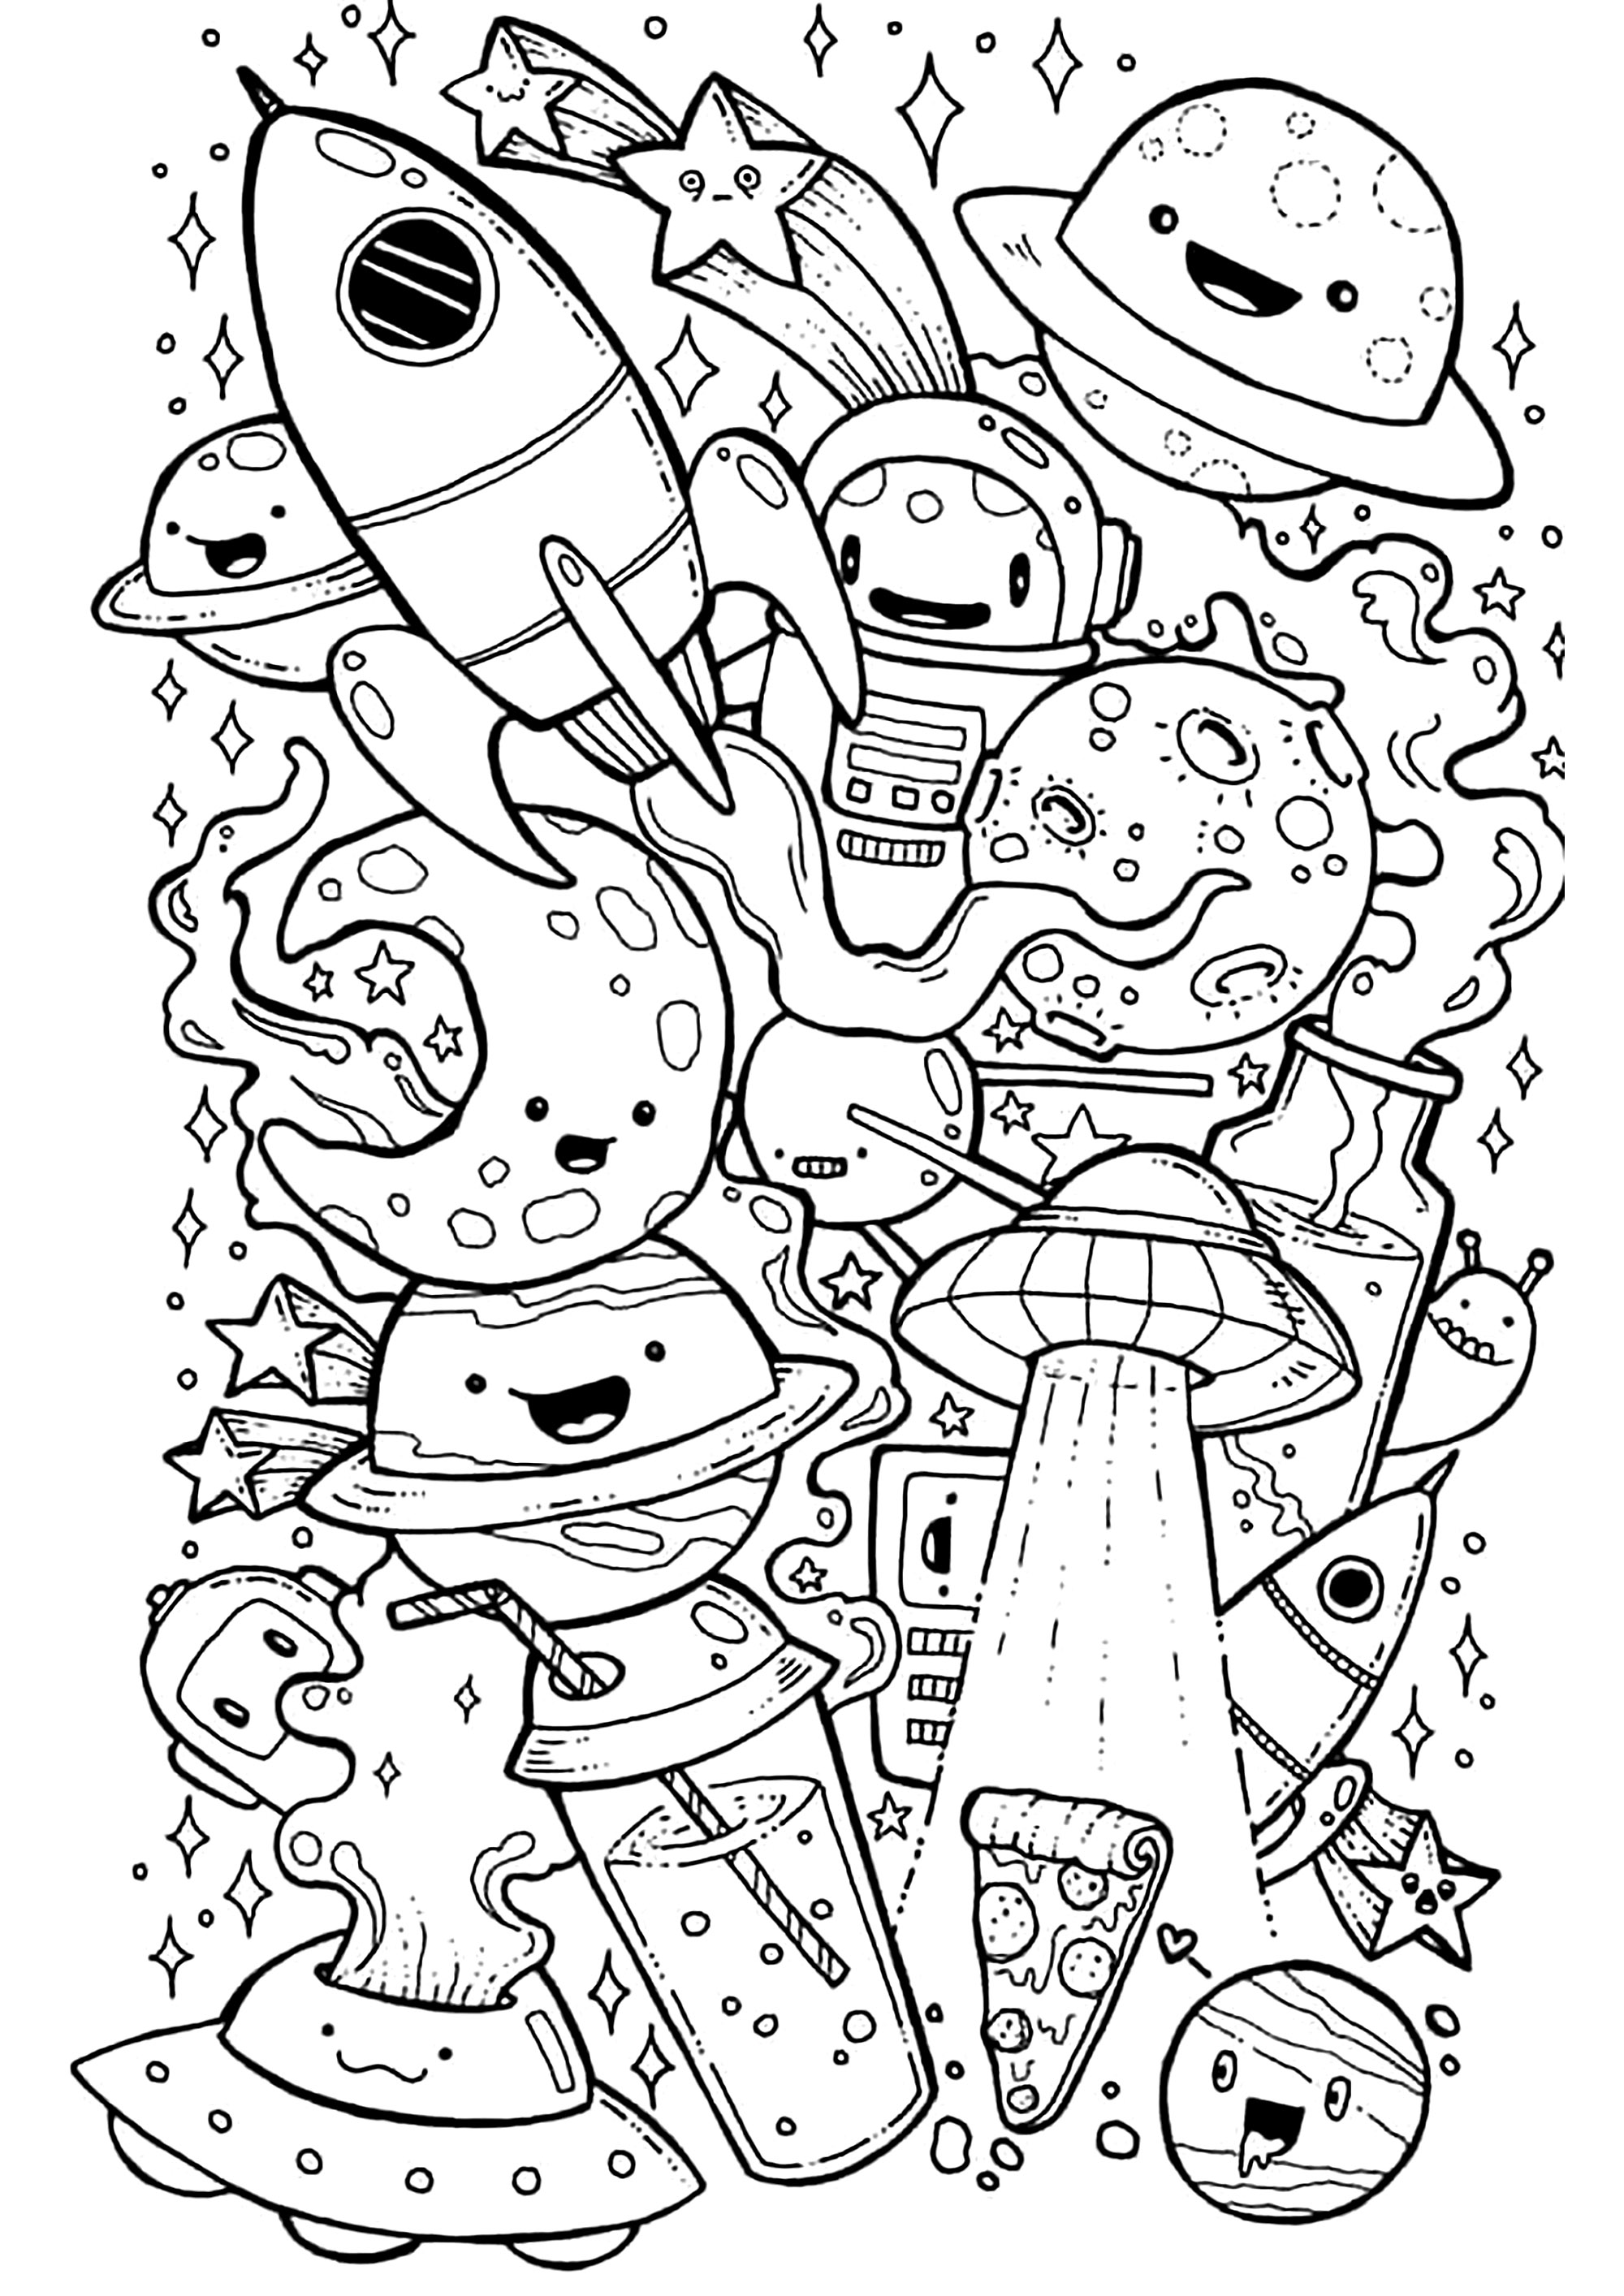 Coloring page : Doodle art / Doodling - 5